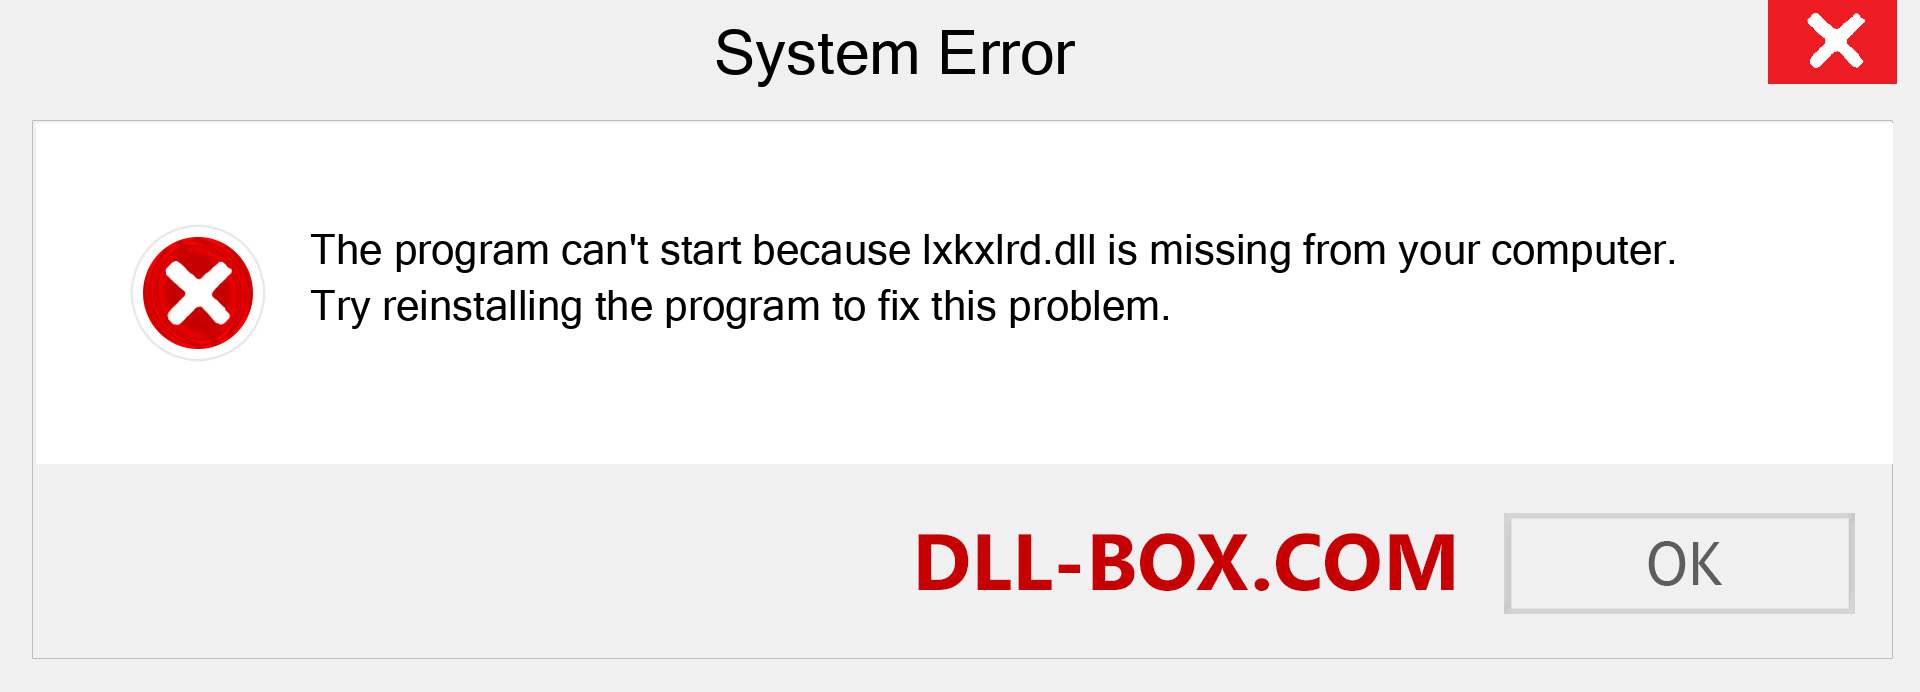  lxkxlrd.dll file is missing?. Download for Windows 7, 8, 10 - Fix  lxkxlrd dll Missing Error on Windows, photos, images